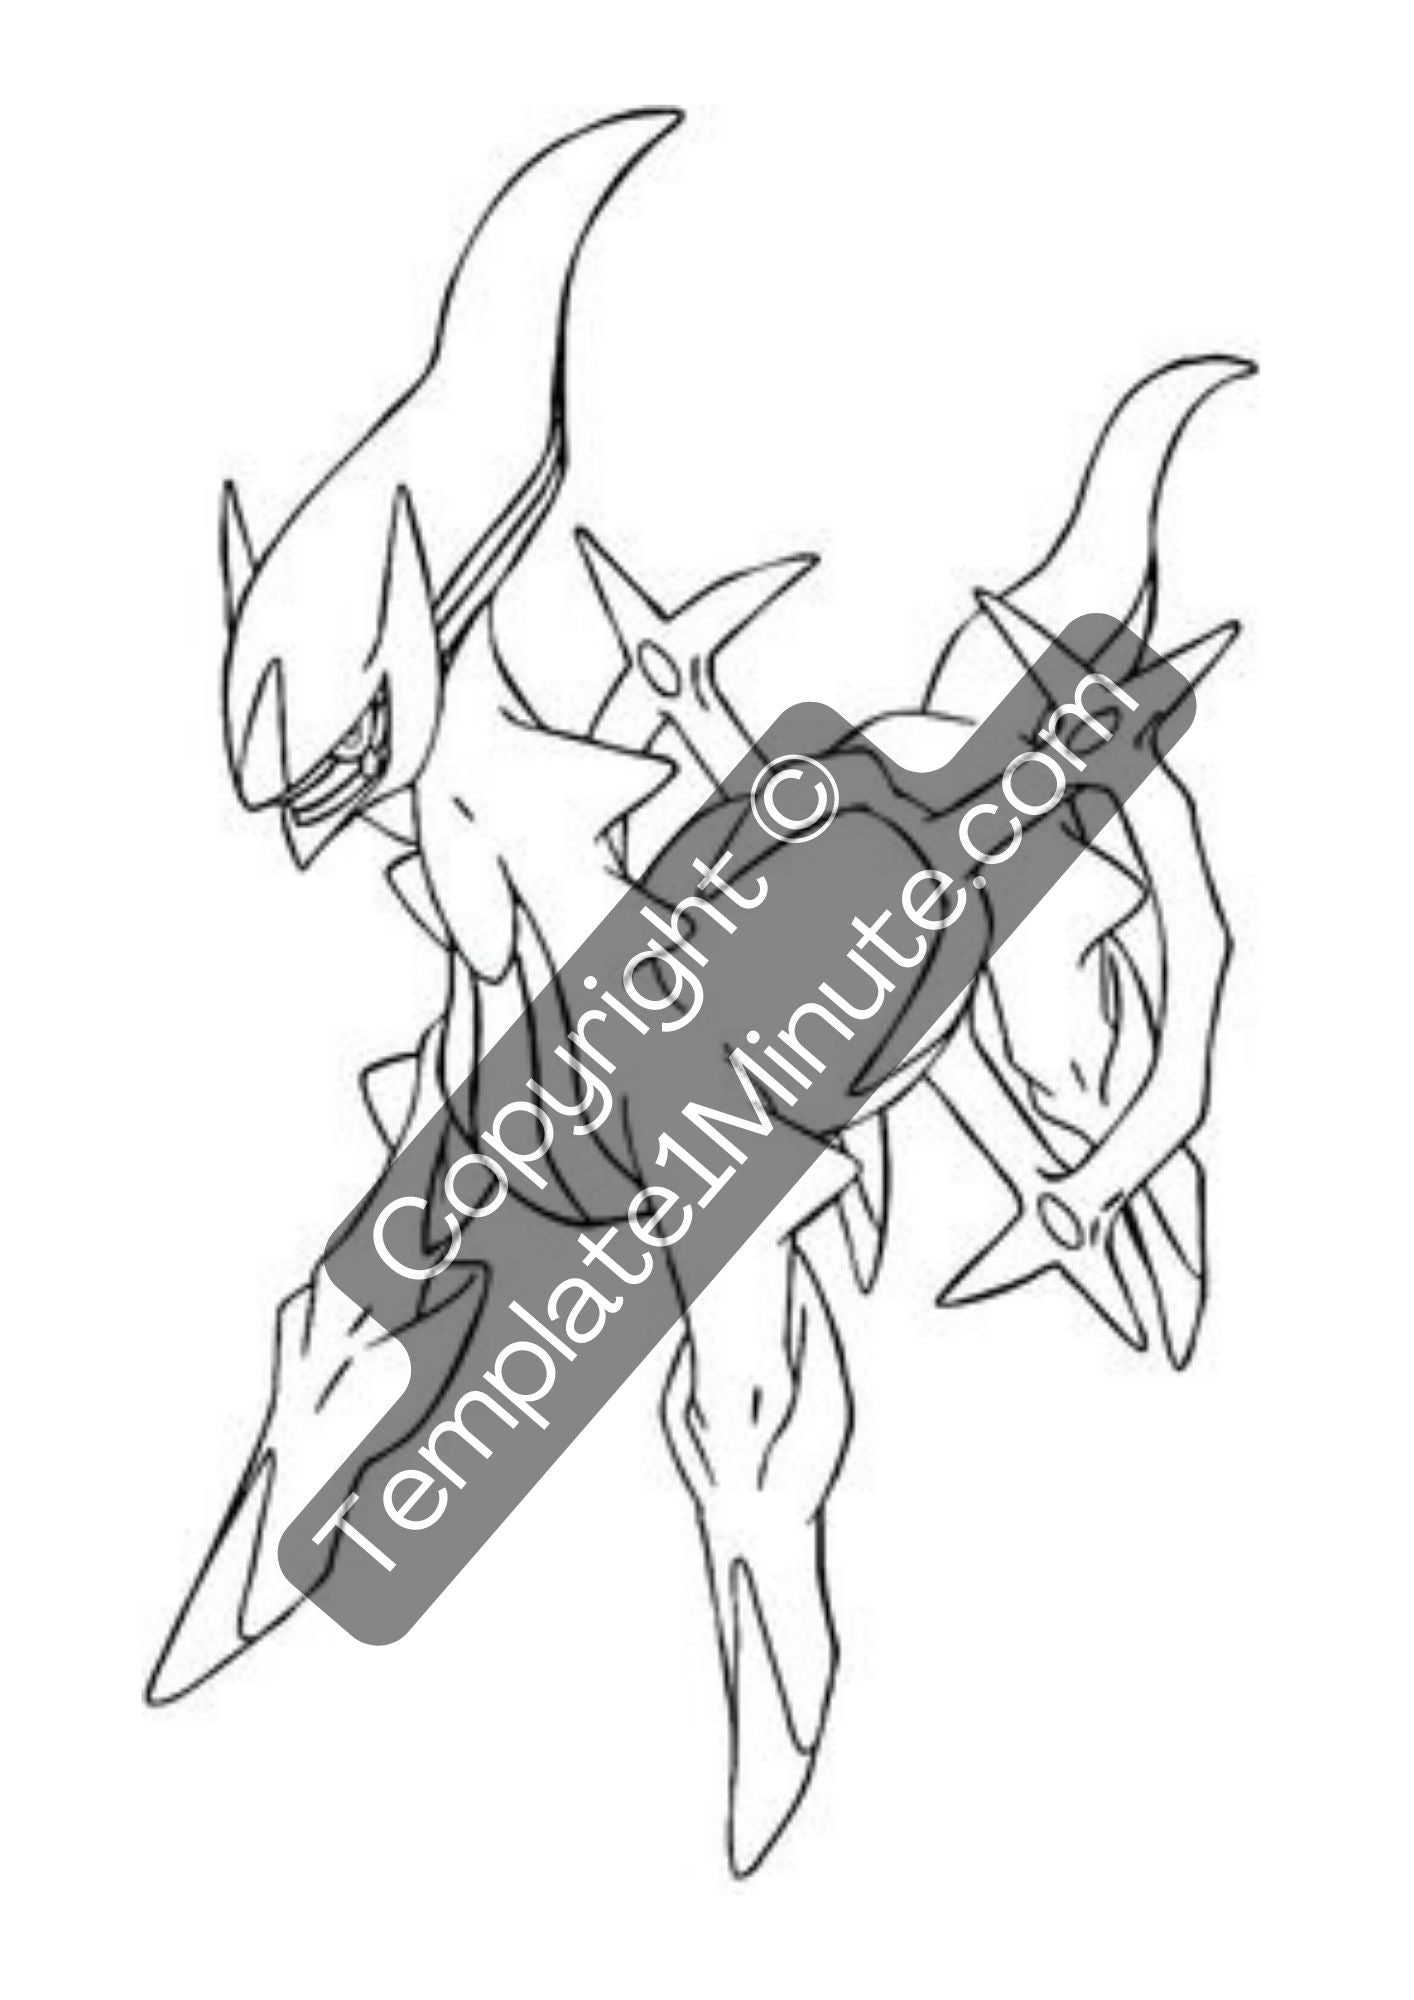 Legendary pokemon coloring pages printable template in pdf â